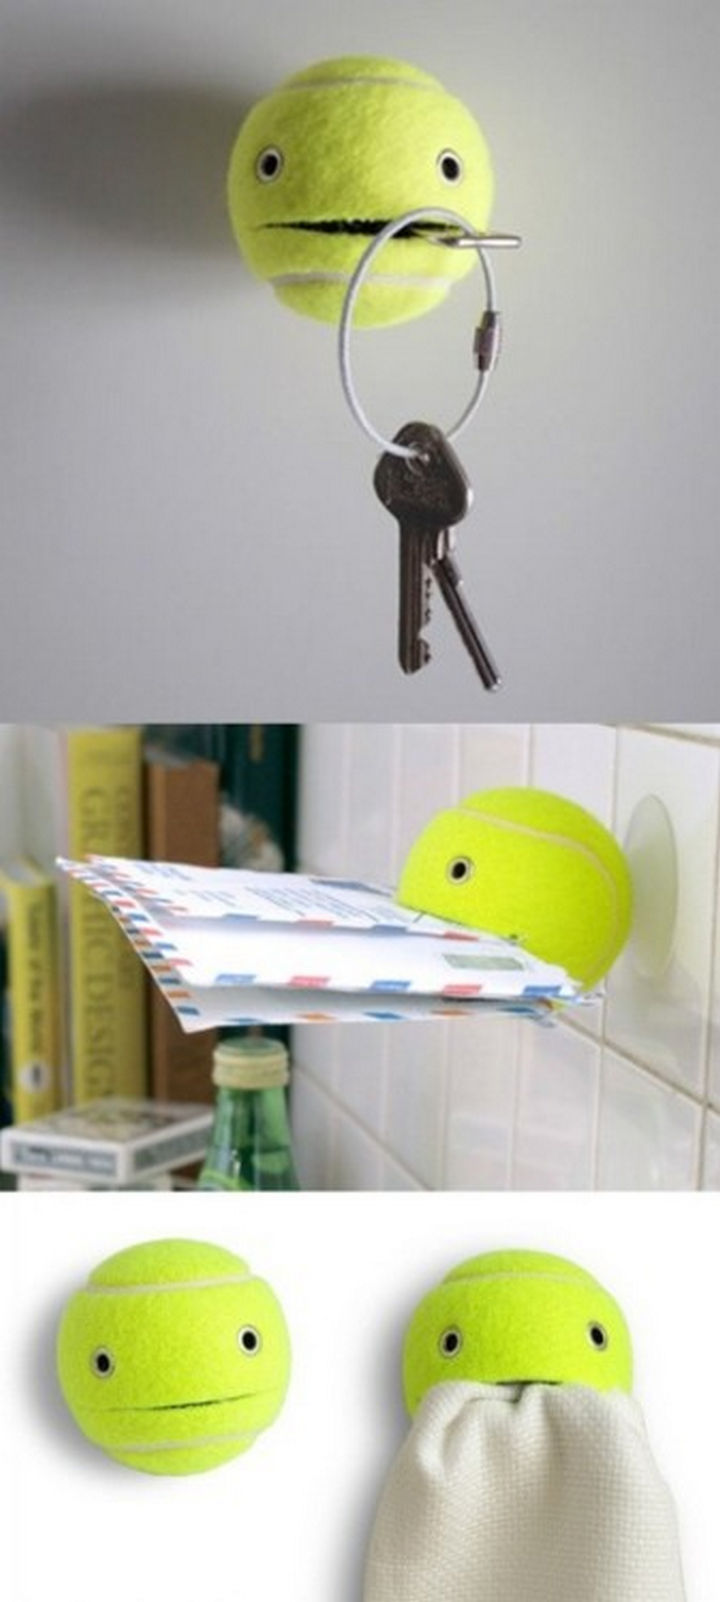 52 Cleaning and Life Hacks - Create a unique key holder using a tennis ball and a suction cup.